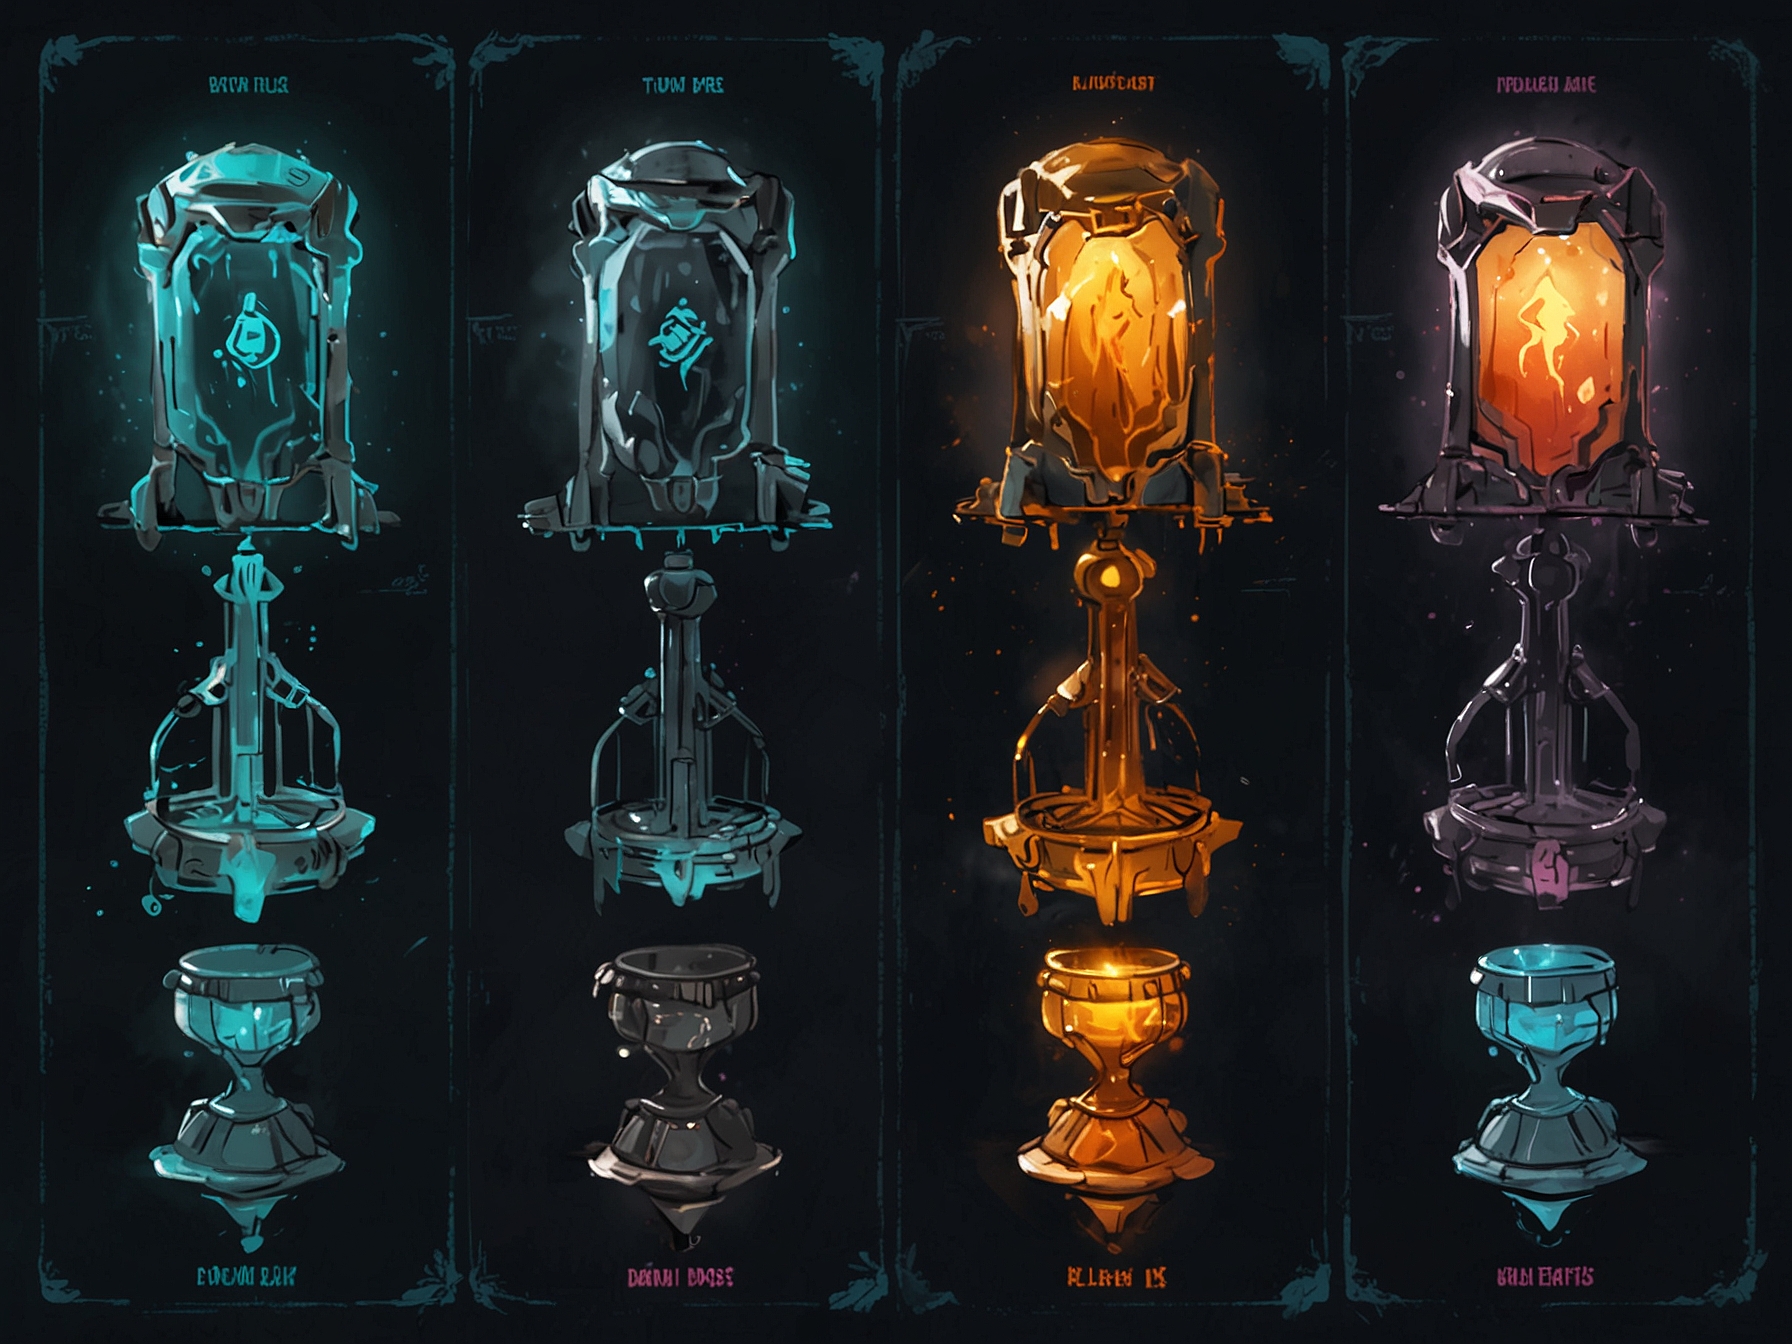 An image displaying the loot drop table for Warframe's Ascension game mode, listing various rewards like Endo, Void Relics, and blueprints, indicating their drop rates and relative desirability.